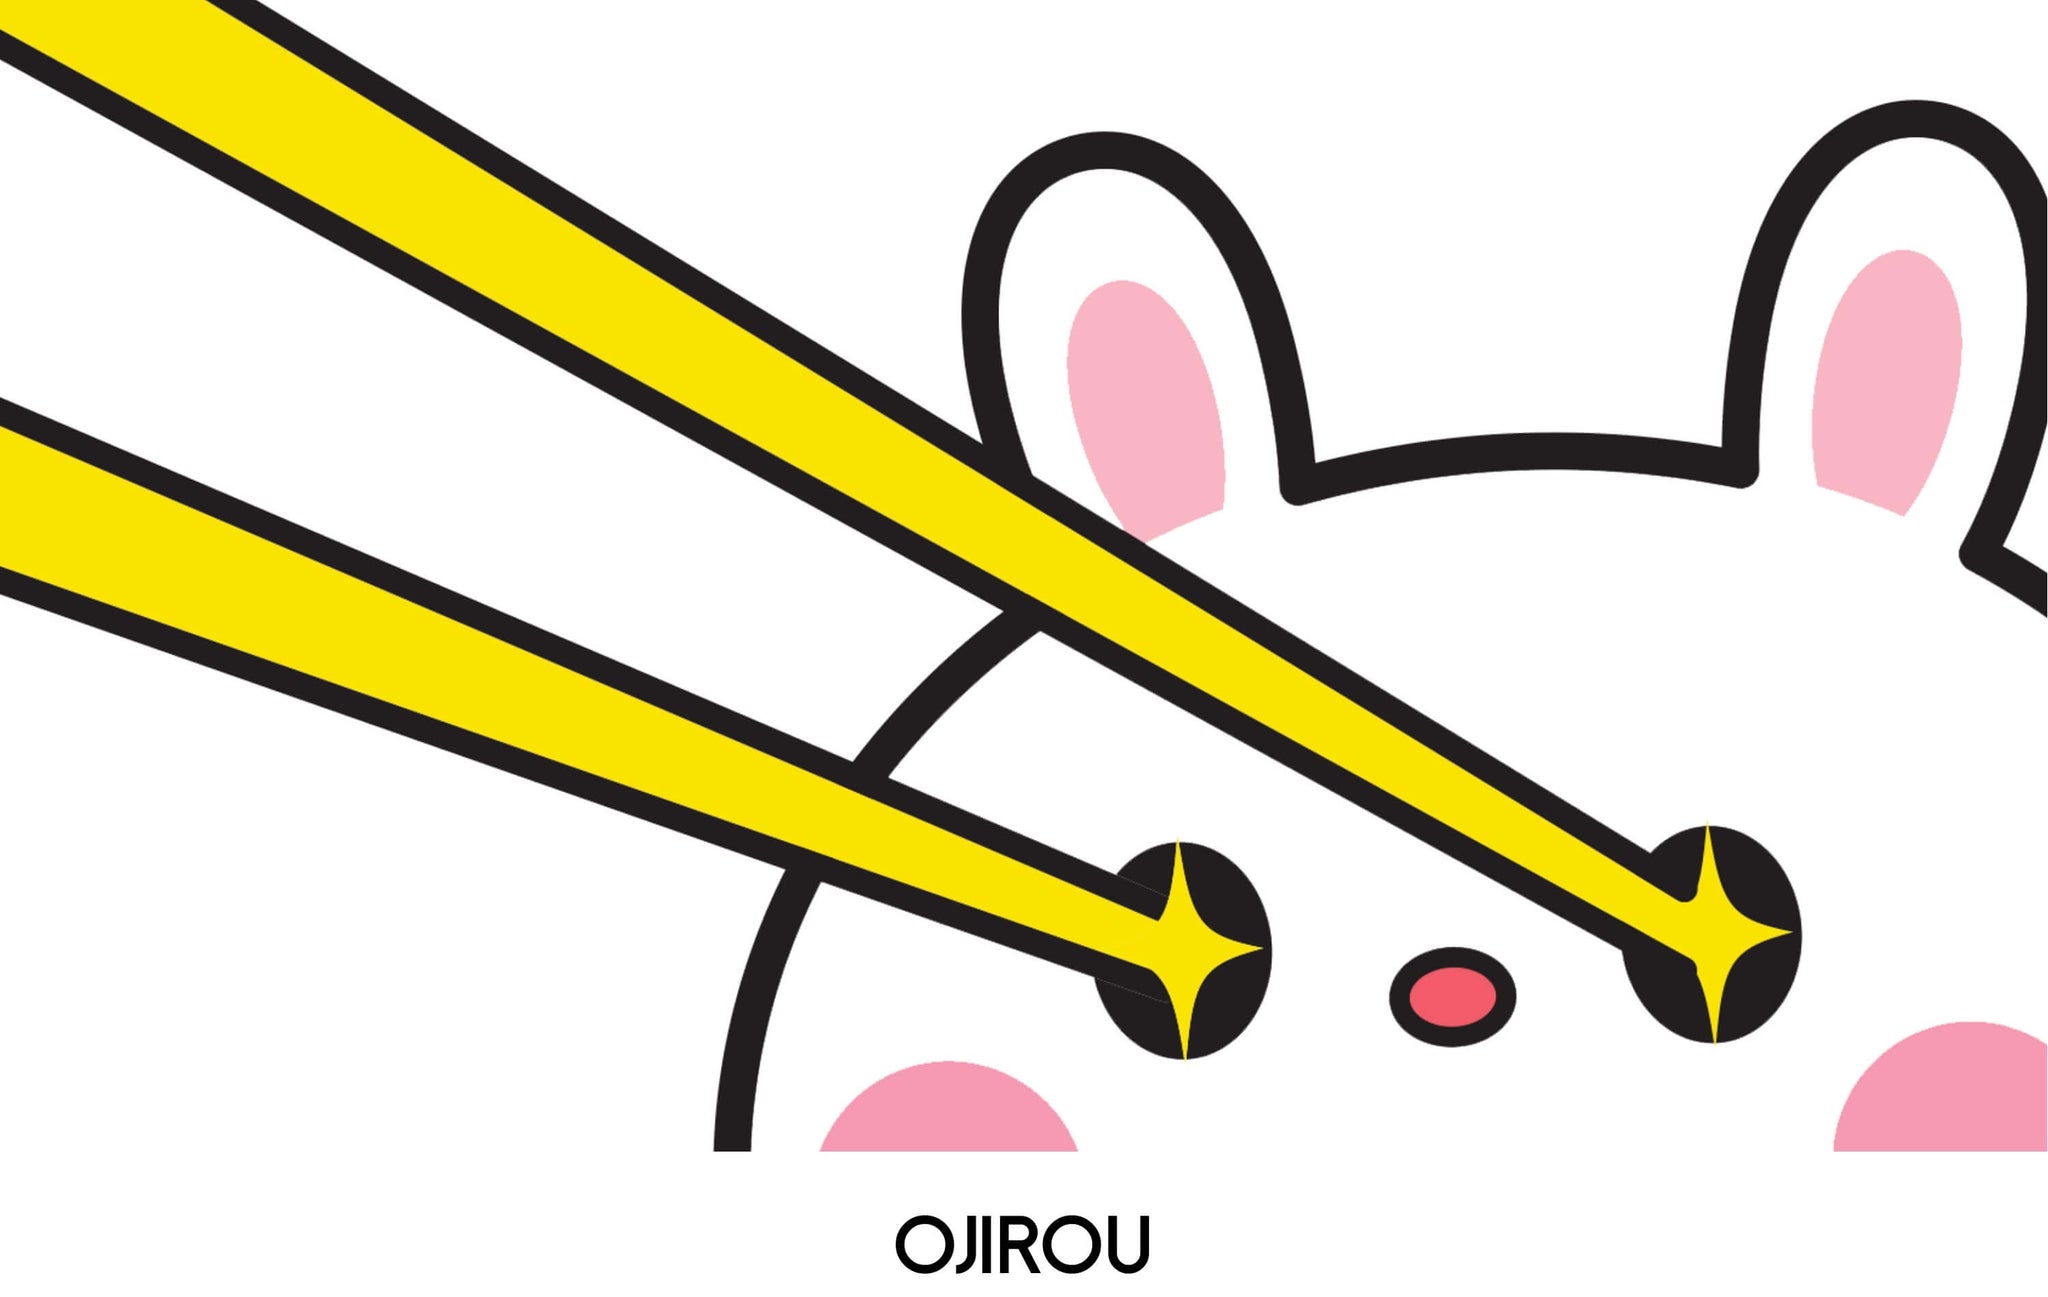 Learn more about Japanese artist O-jirou.